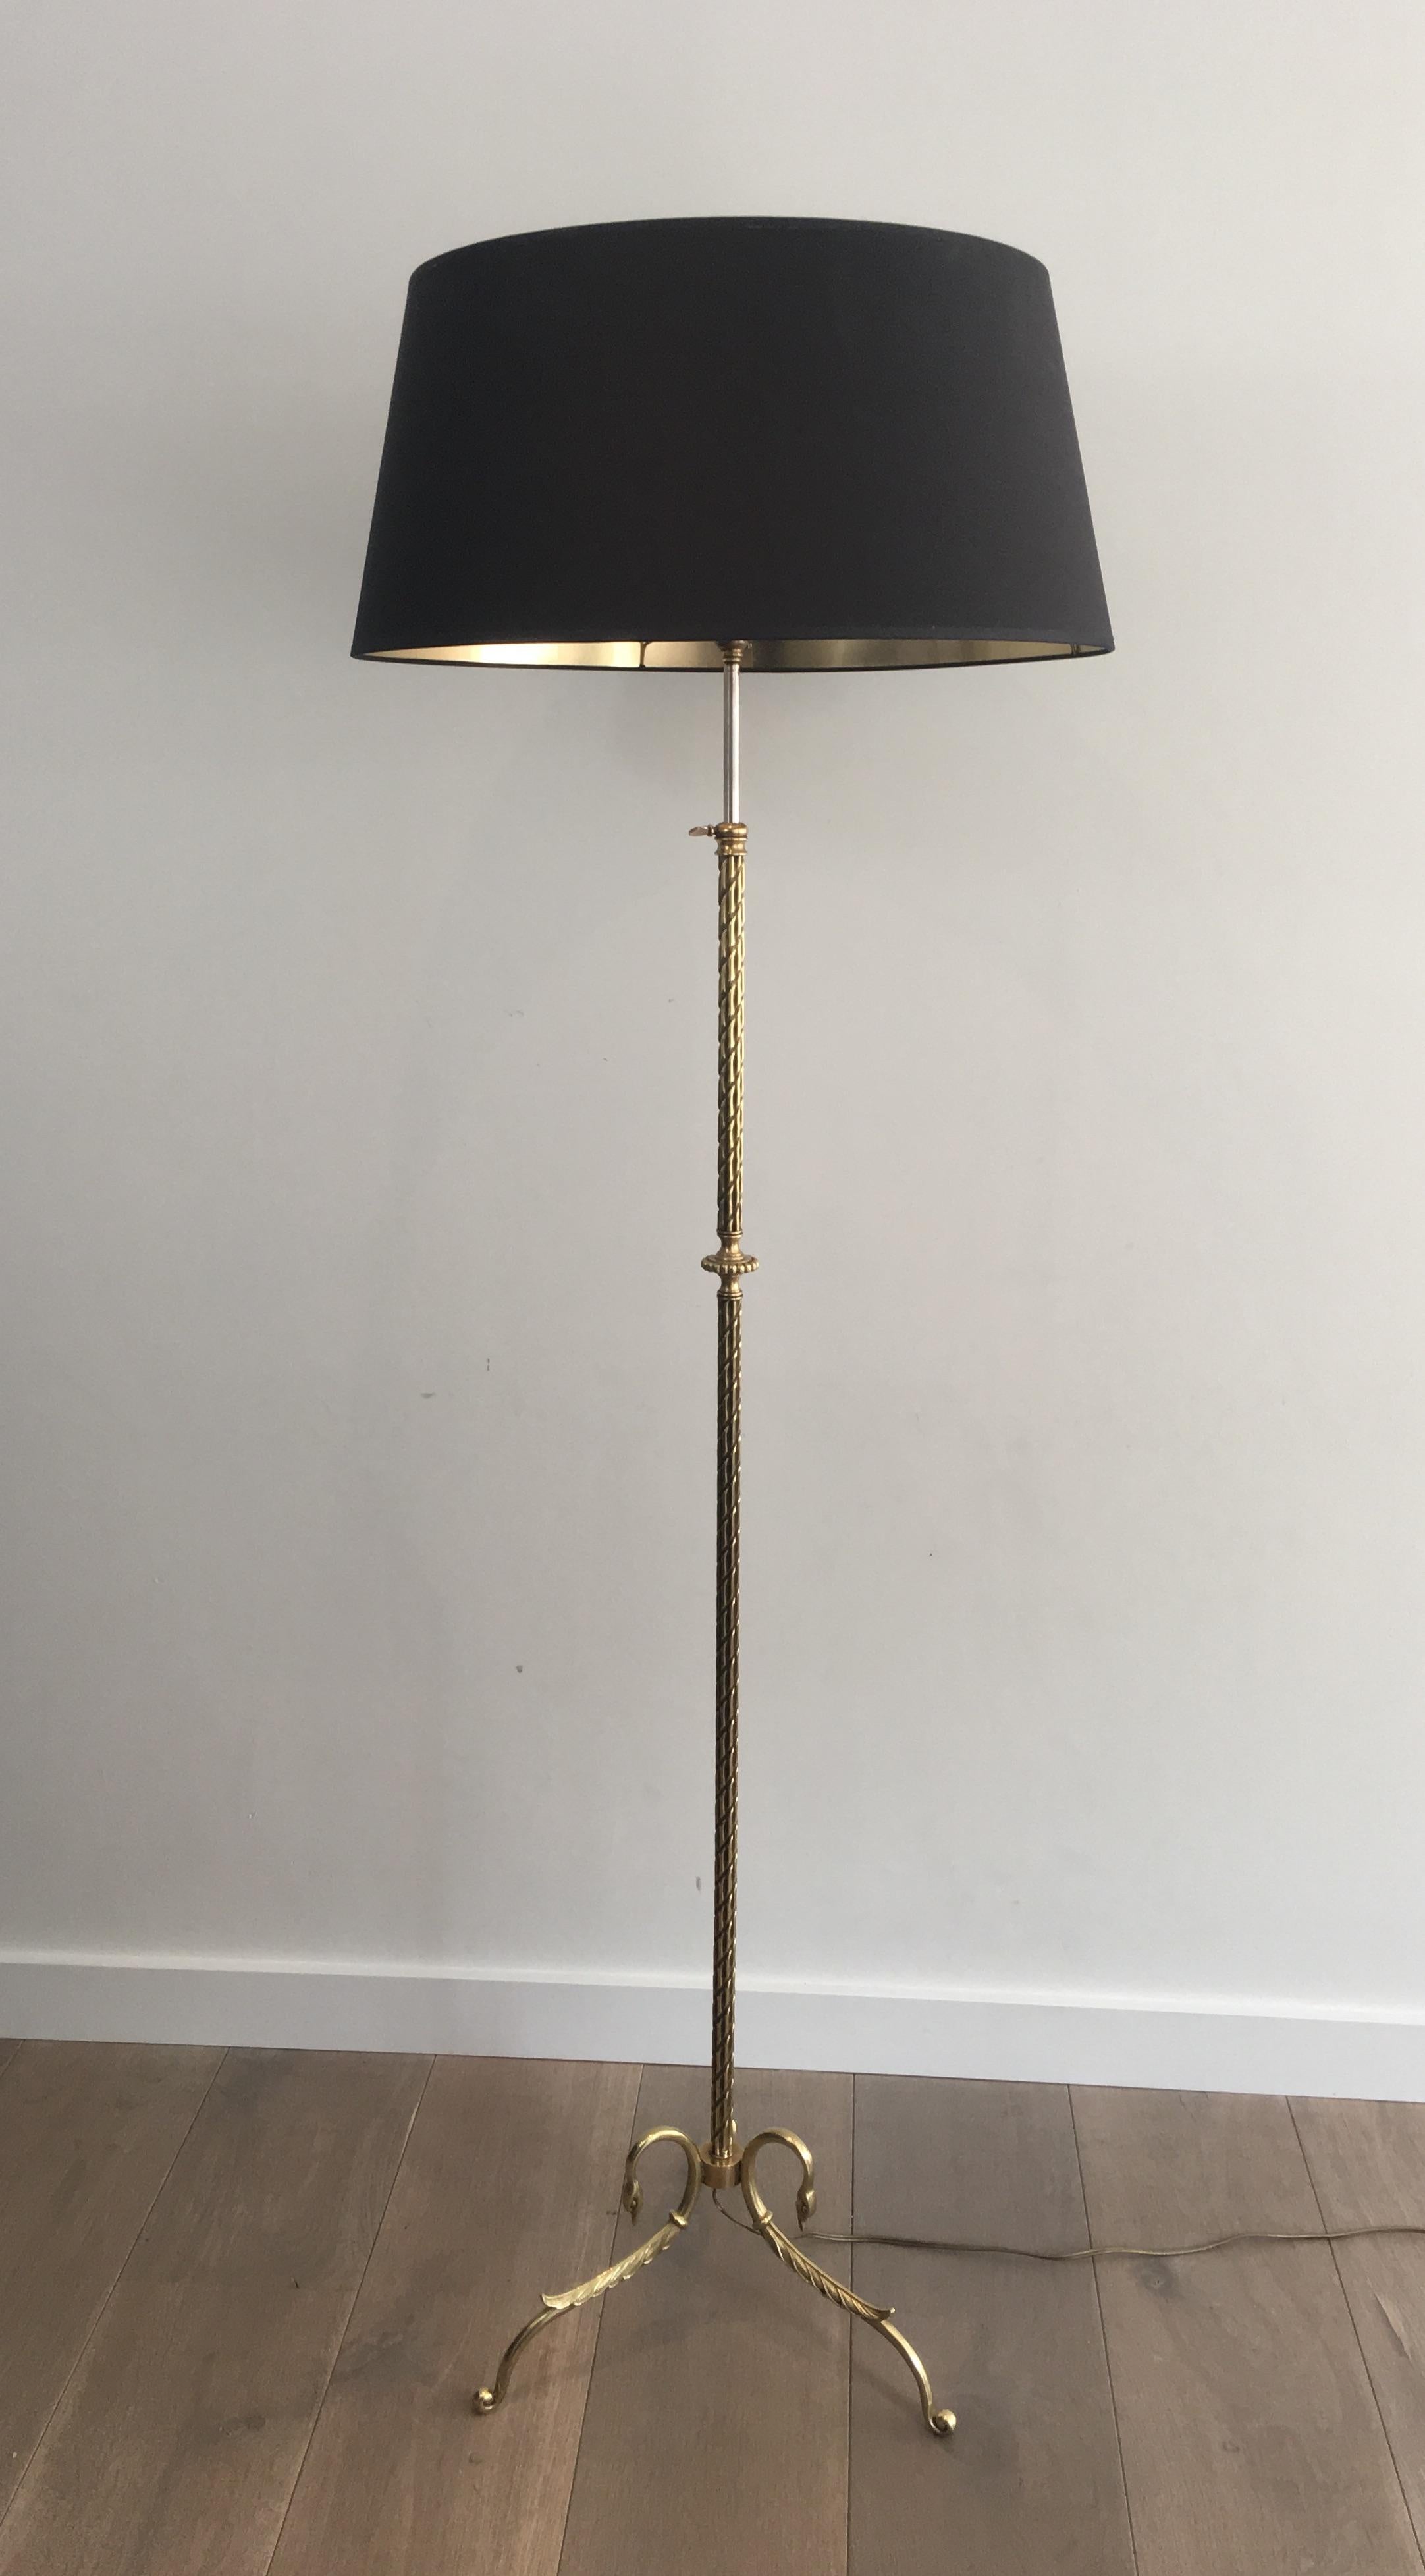 This neoclassical floor lamp is made of bronze and brass. The base is beautiful, chiselled and decorated with swanheads, the main part is chiselled and richly decorated as well and the floor lamp is adjustable. The shade has been remade with a black